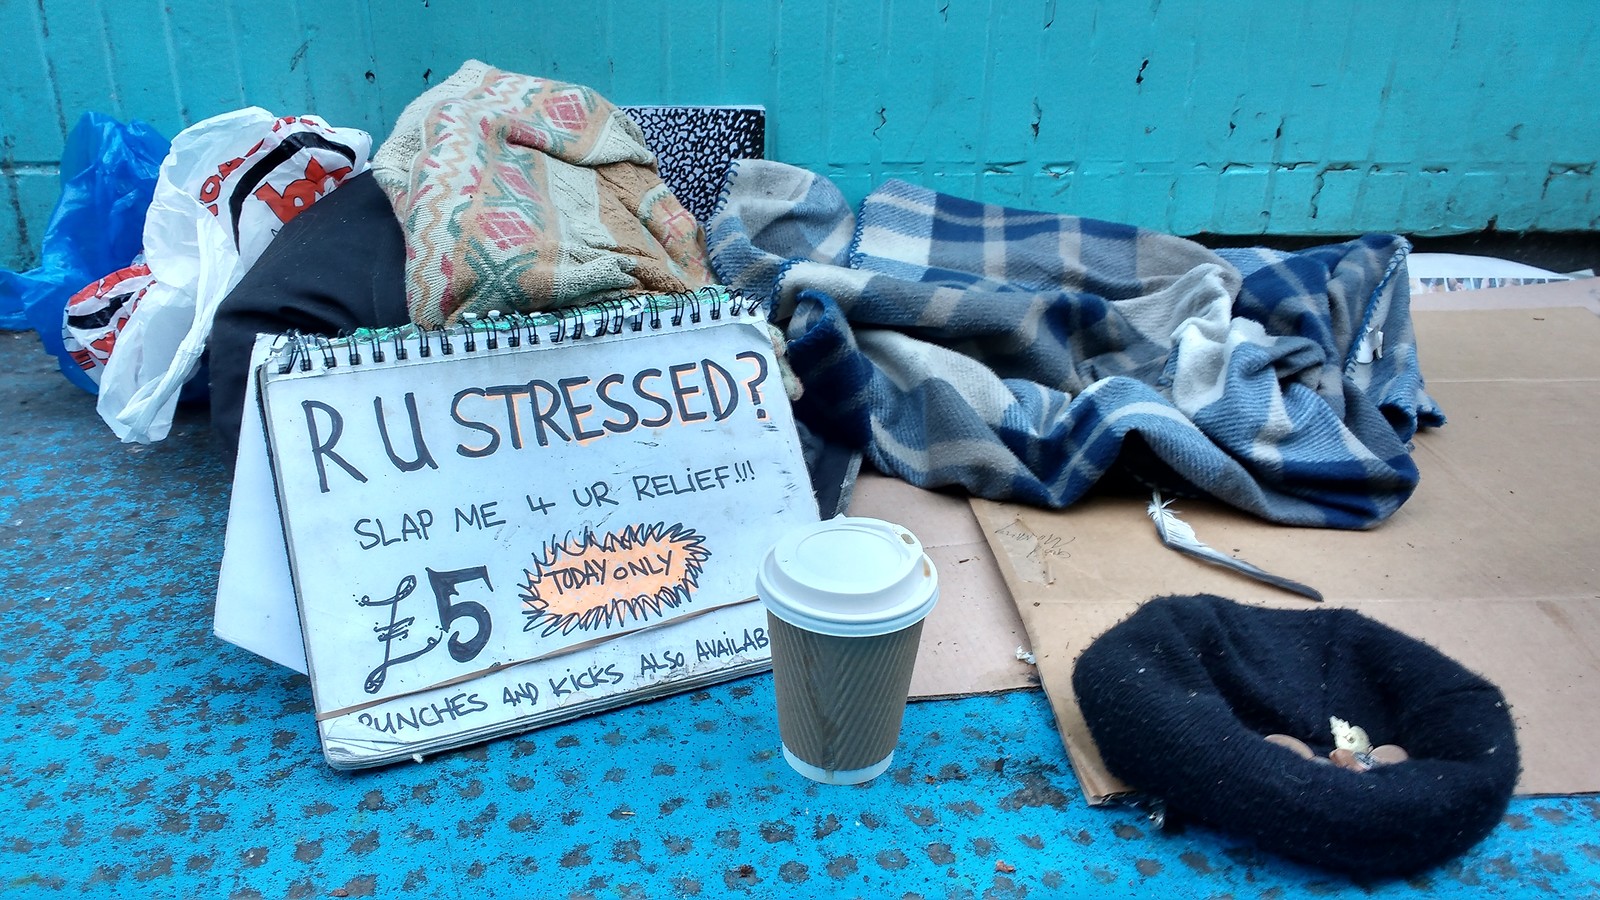 Know Your Rights: A Guide to Homeless Services at PRSC